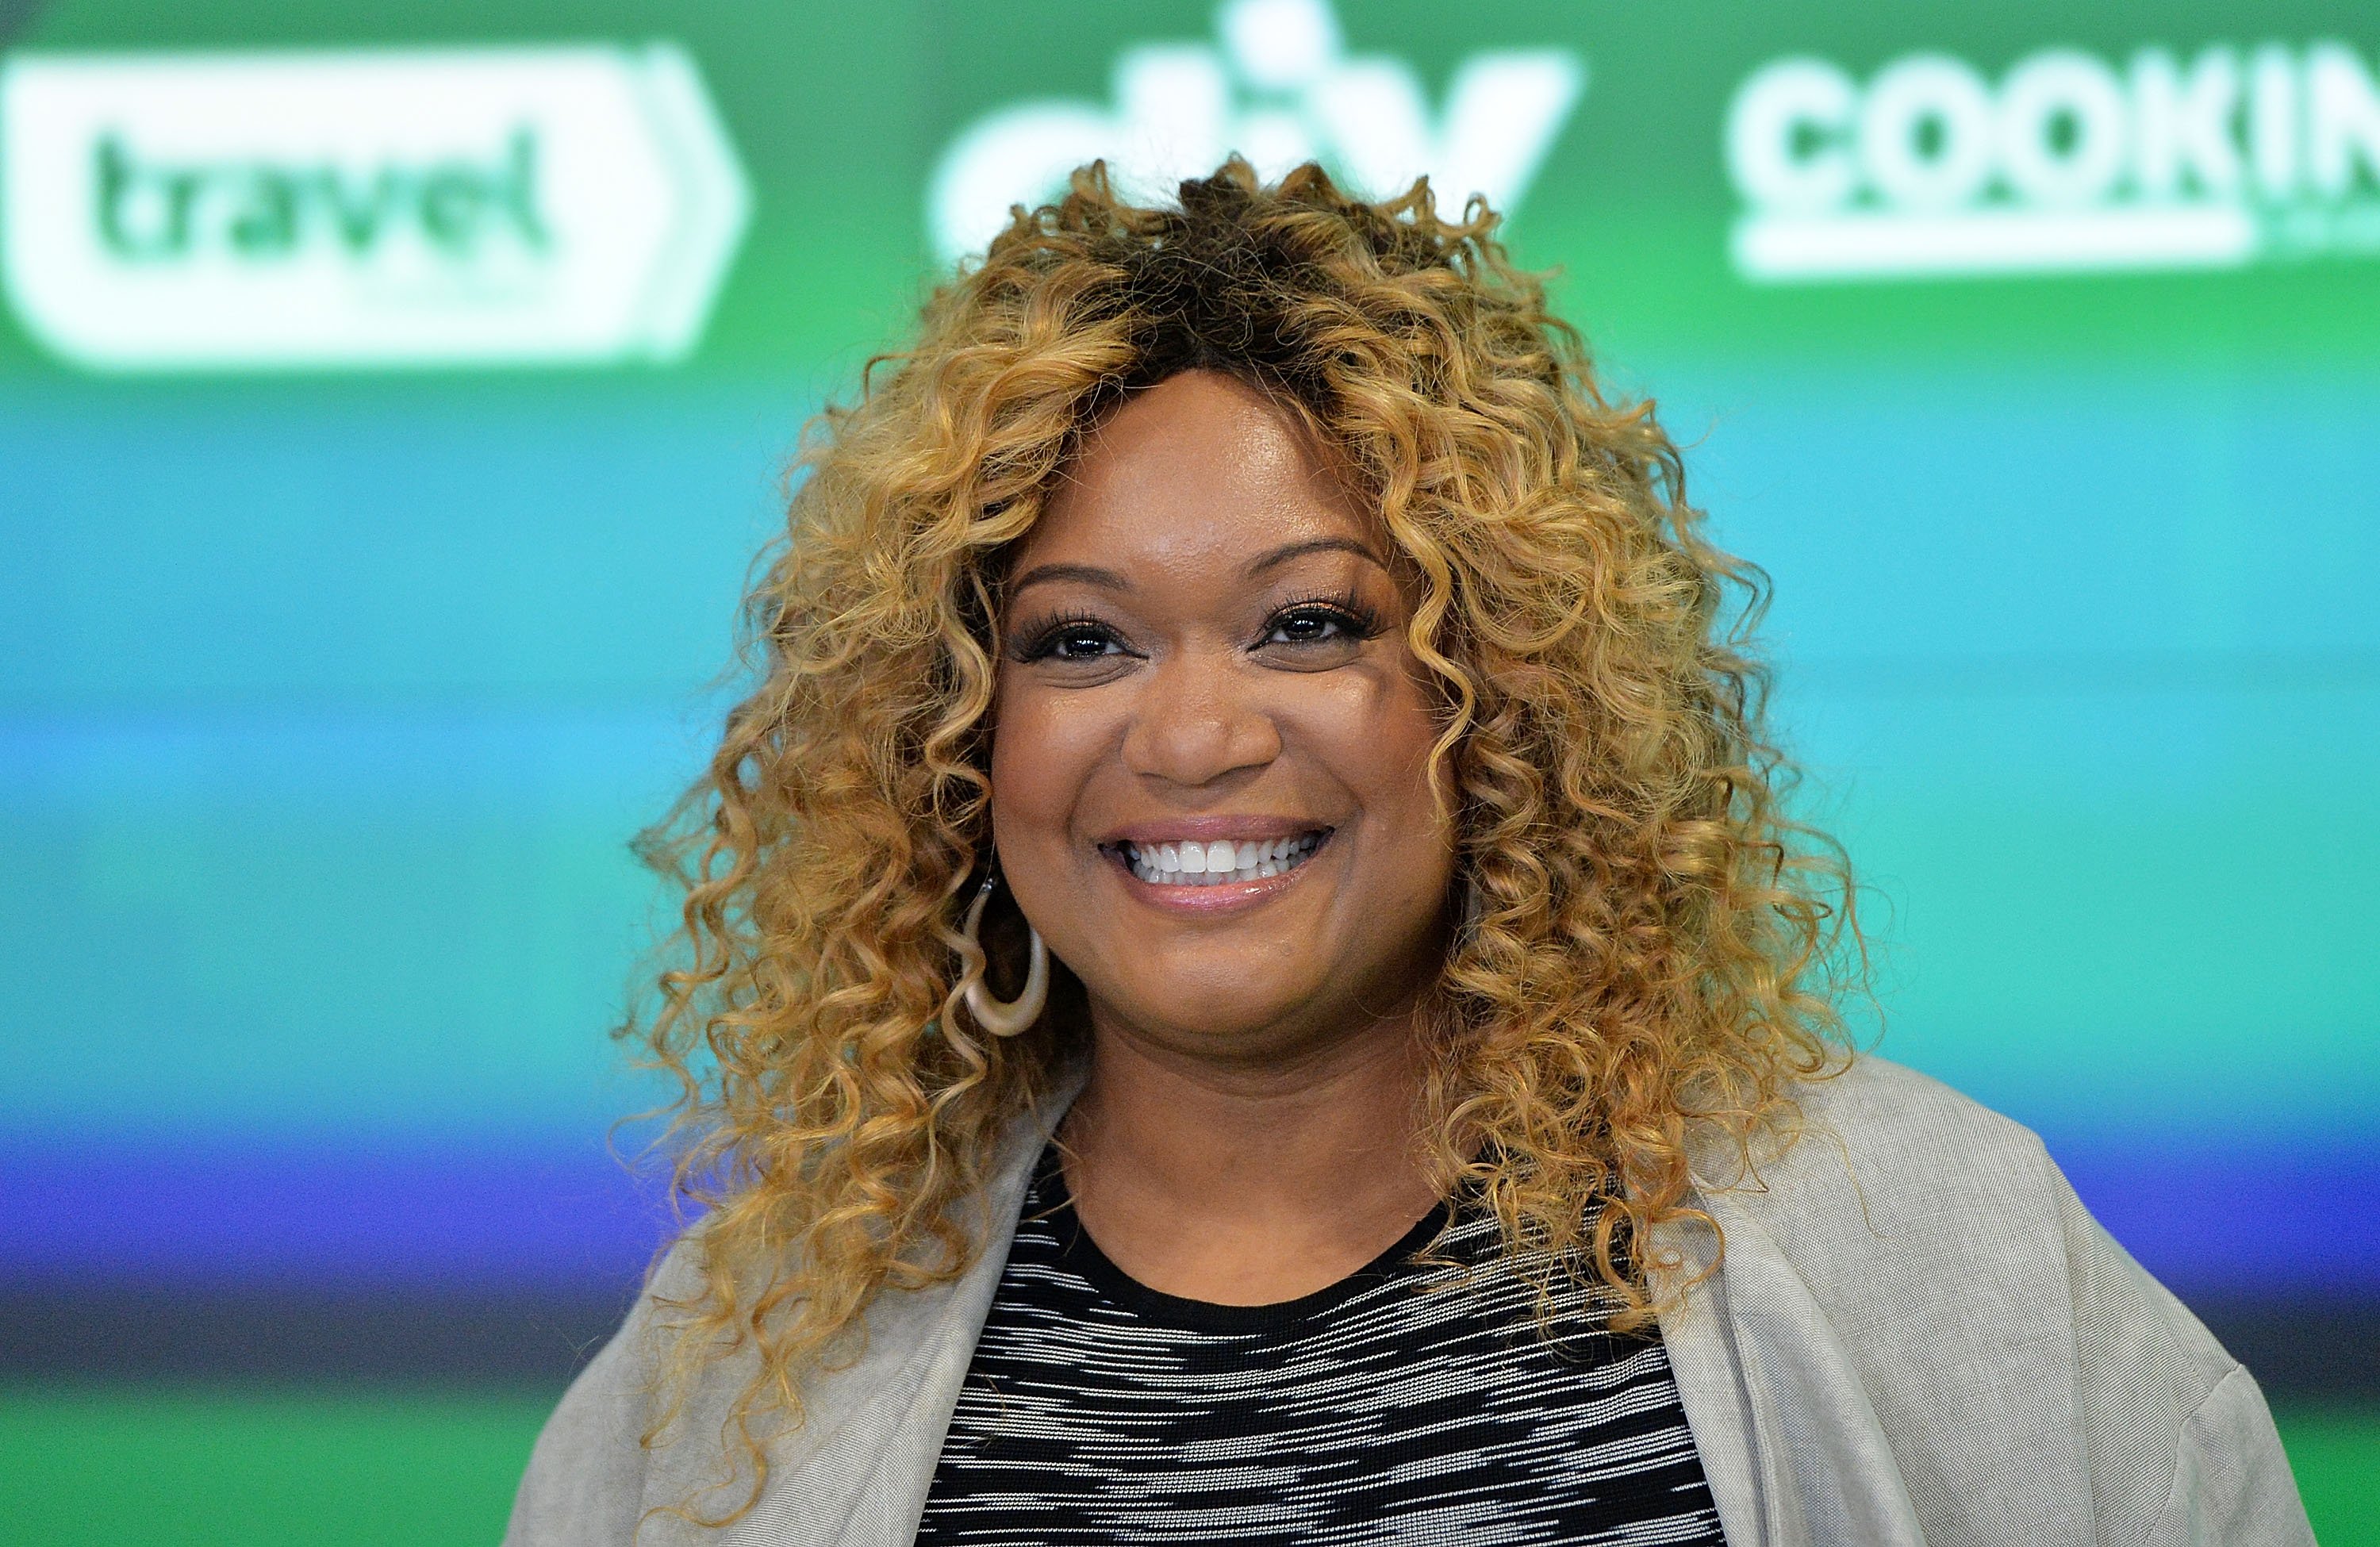 Sunny Anderson rings the NASDAQ Opening Bell at NASDAQ on June 2, 2016 in New York City | Photo: GettyImages